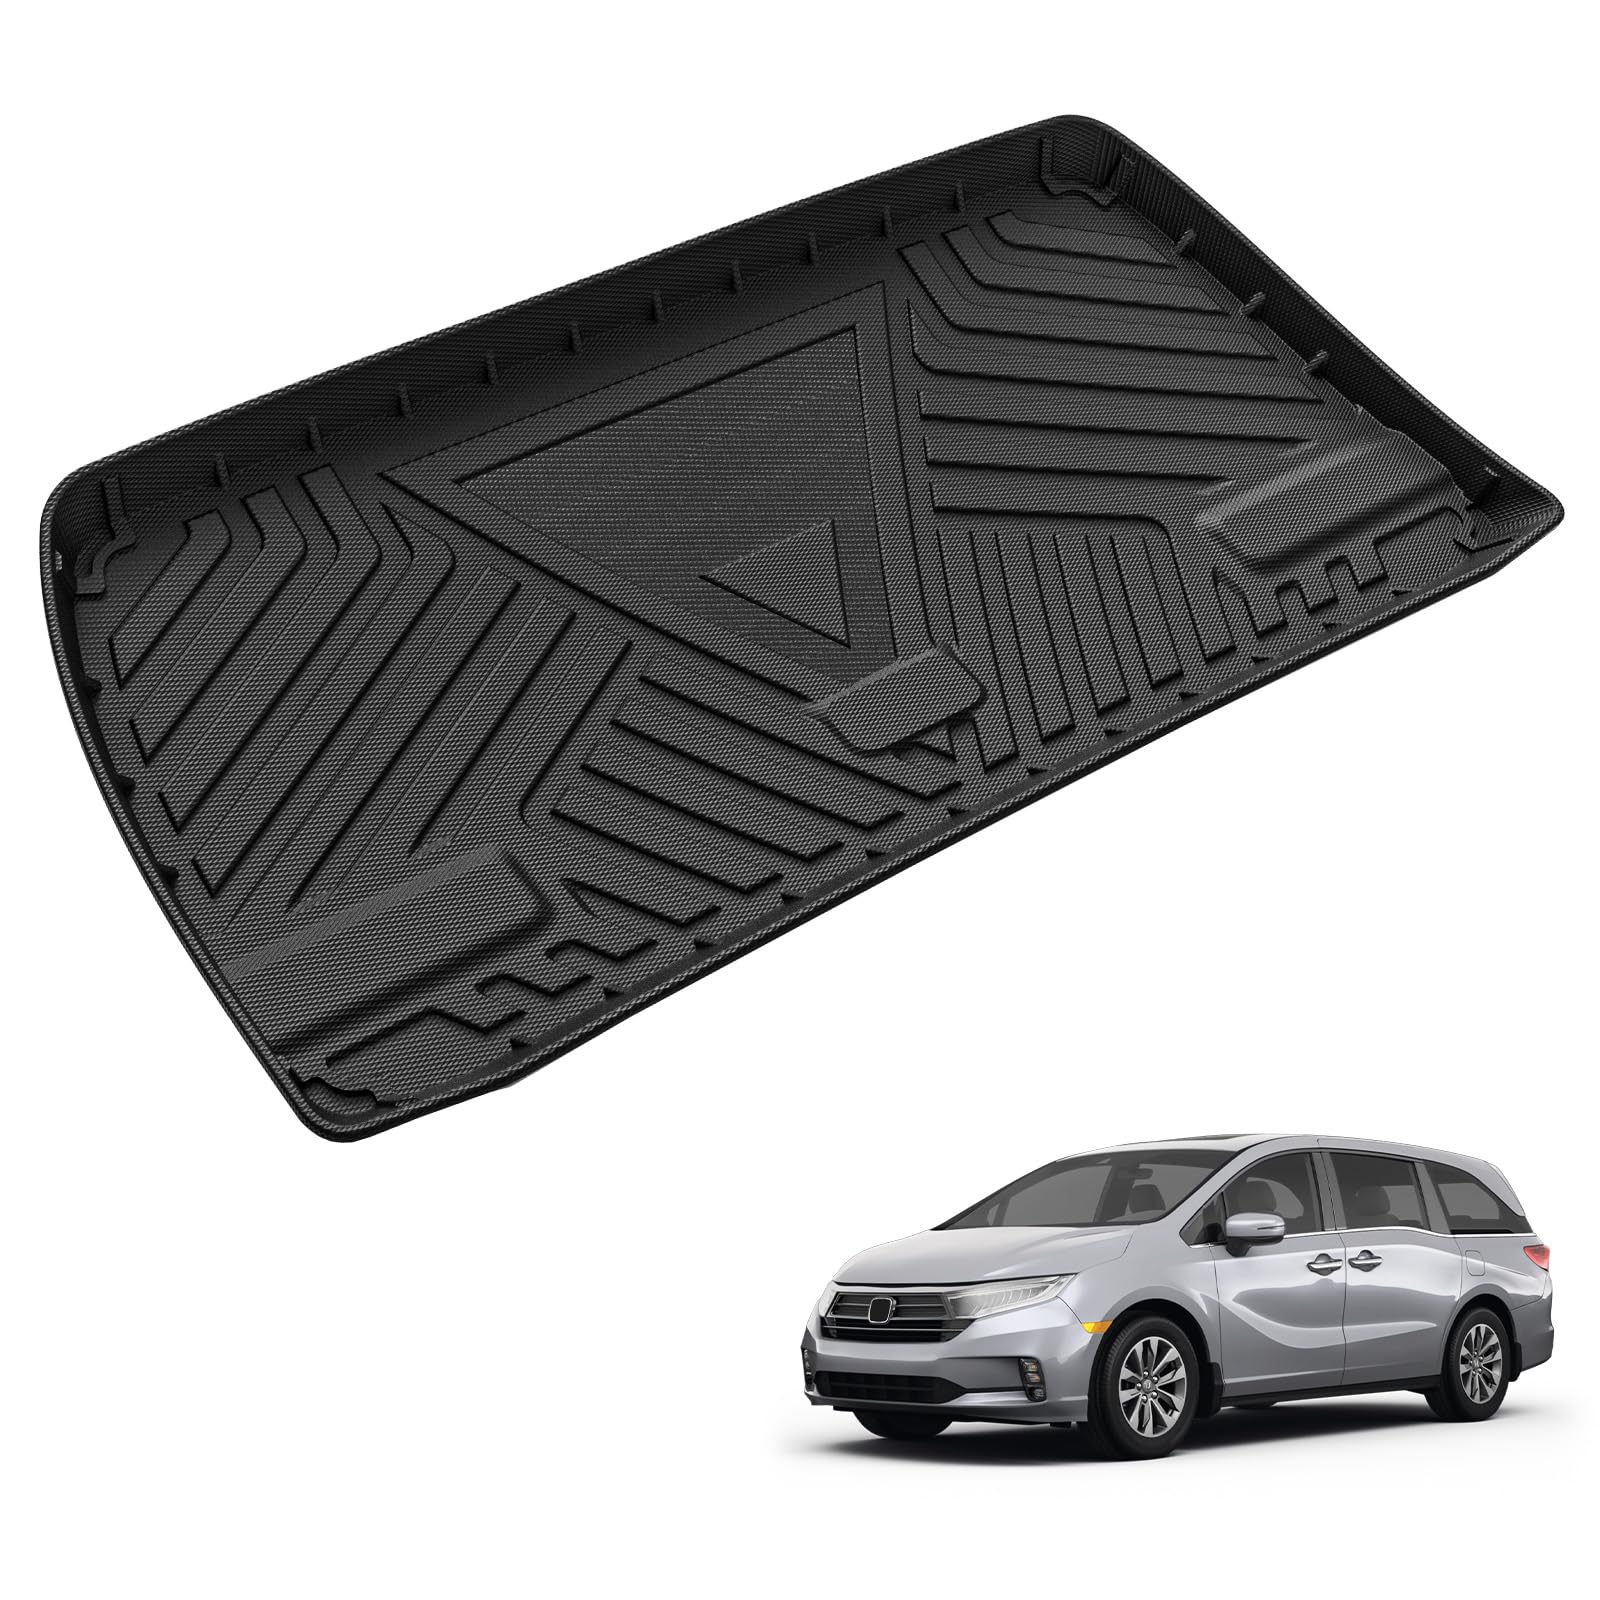 3W Honda Odyssey 2018-2024 Custom Floor Mats / Trunk Mat TPE Material & All-Weather Protection Vehicles & Parts 3Wliners 2018-2024 Odyssey 2018-2024 Trunk Mat